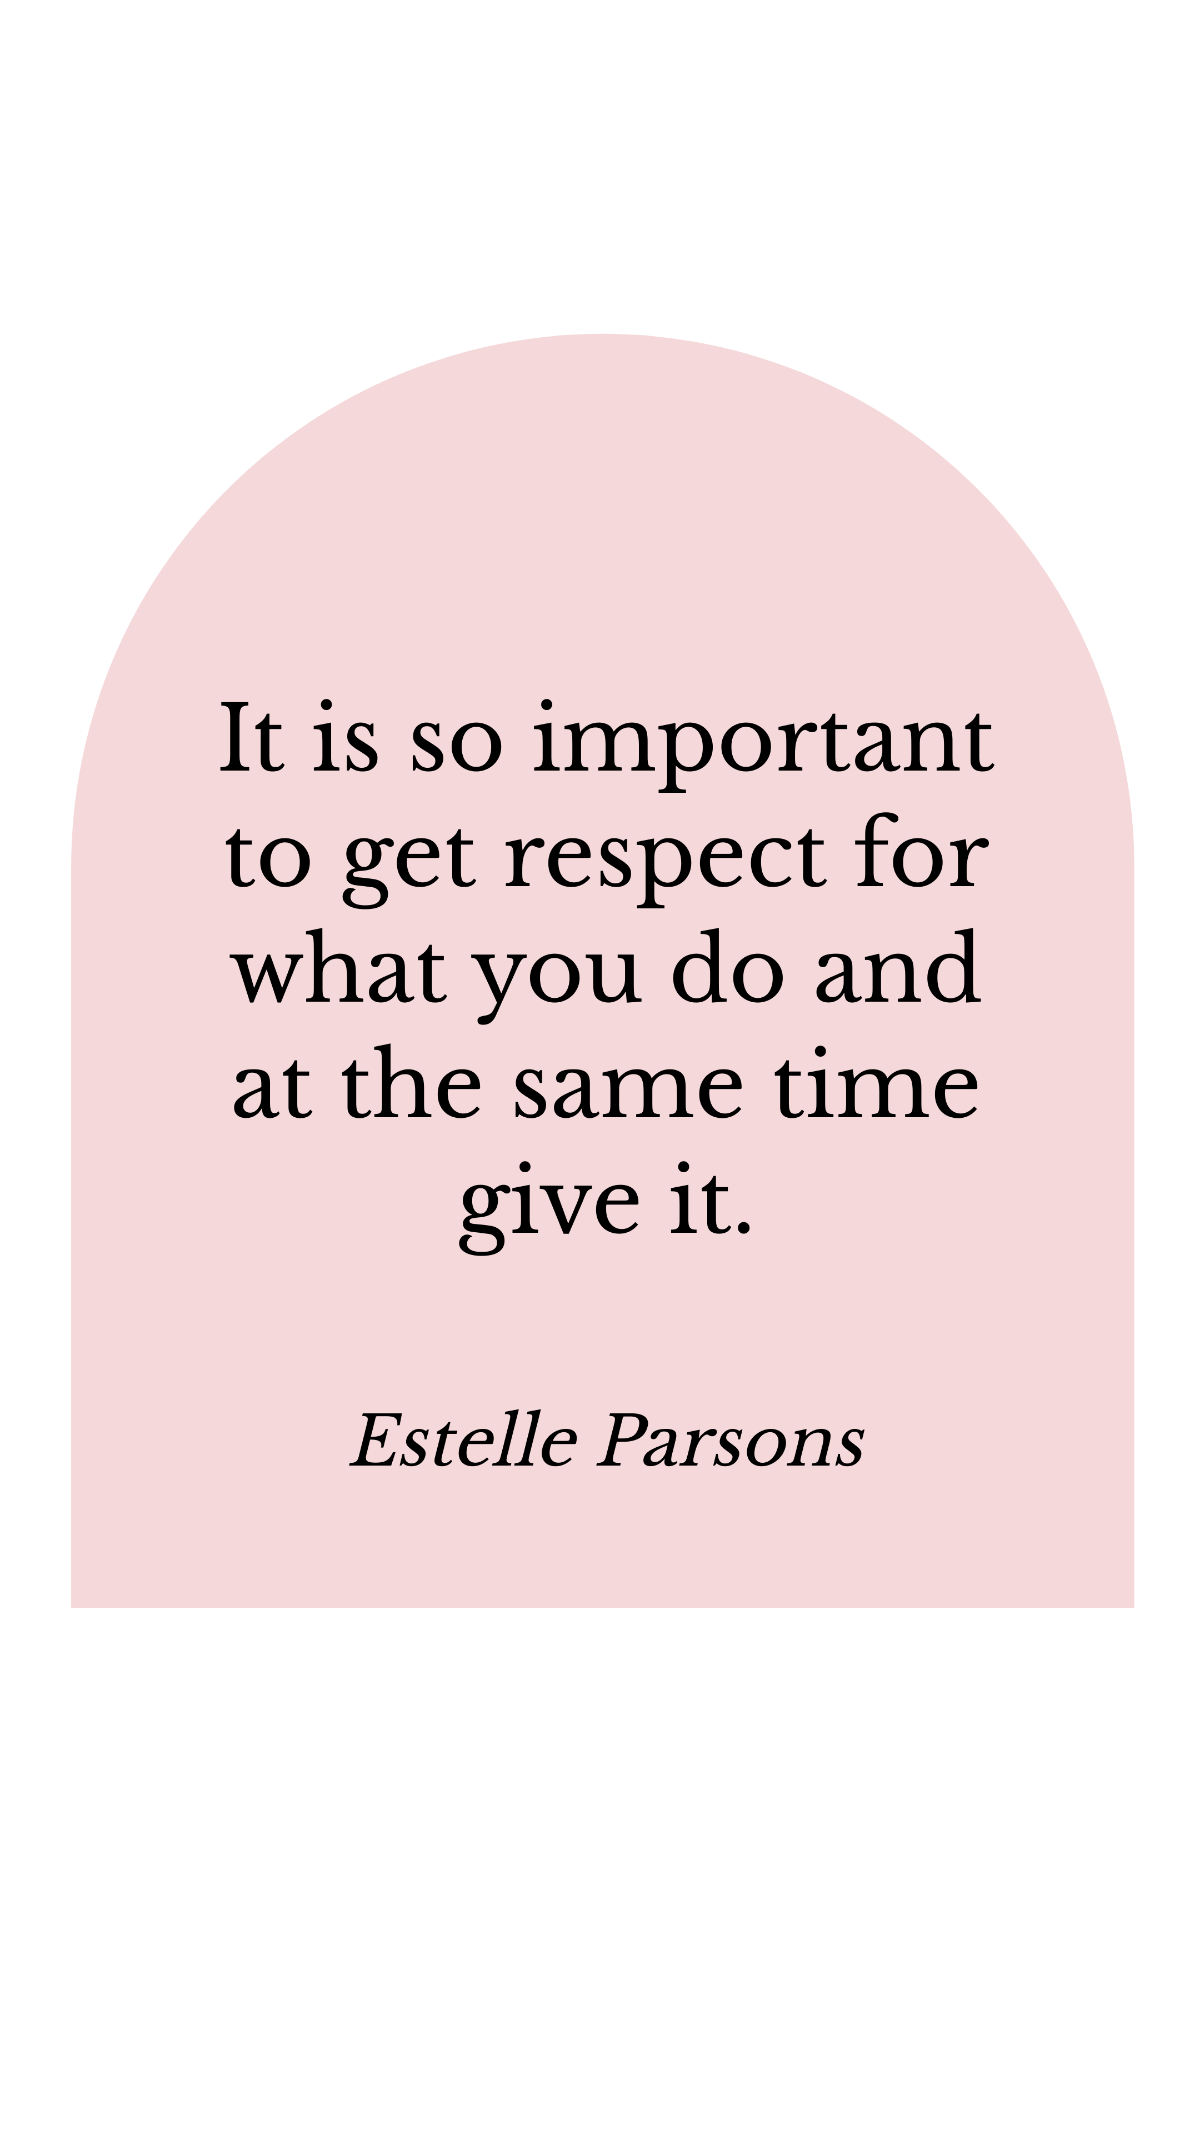 Estelle Parsons - It is so important to get respect for what you do and at the same time give it. Template